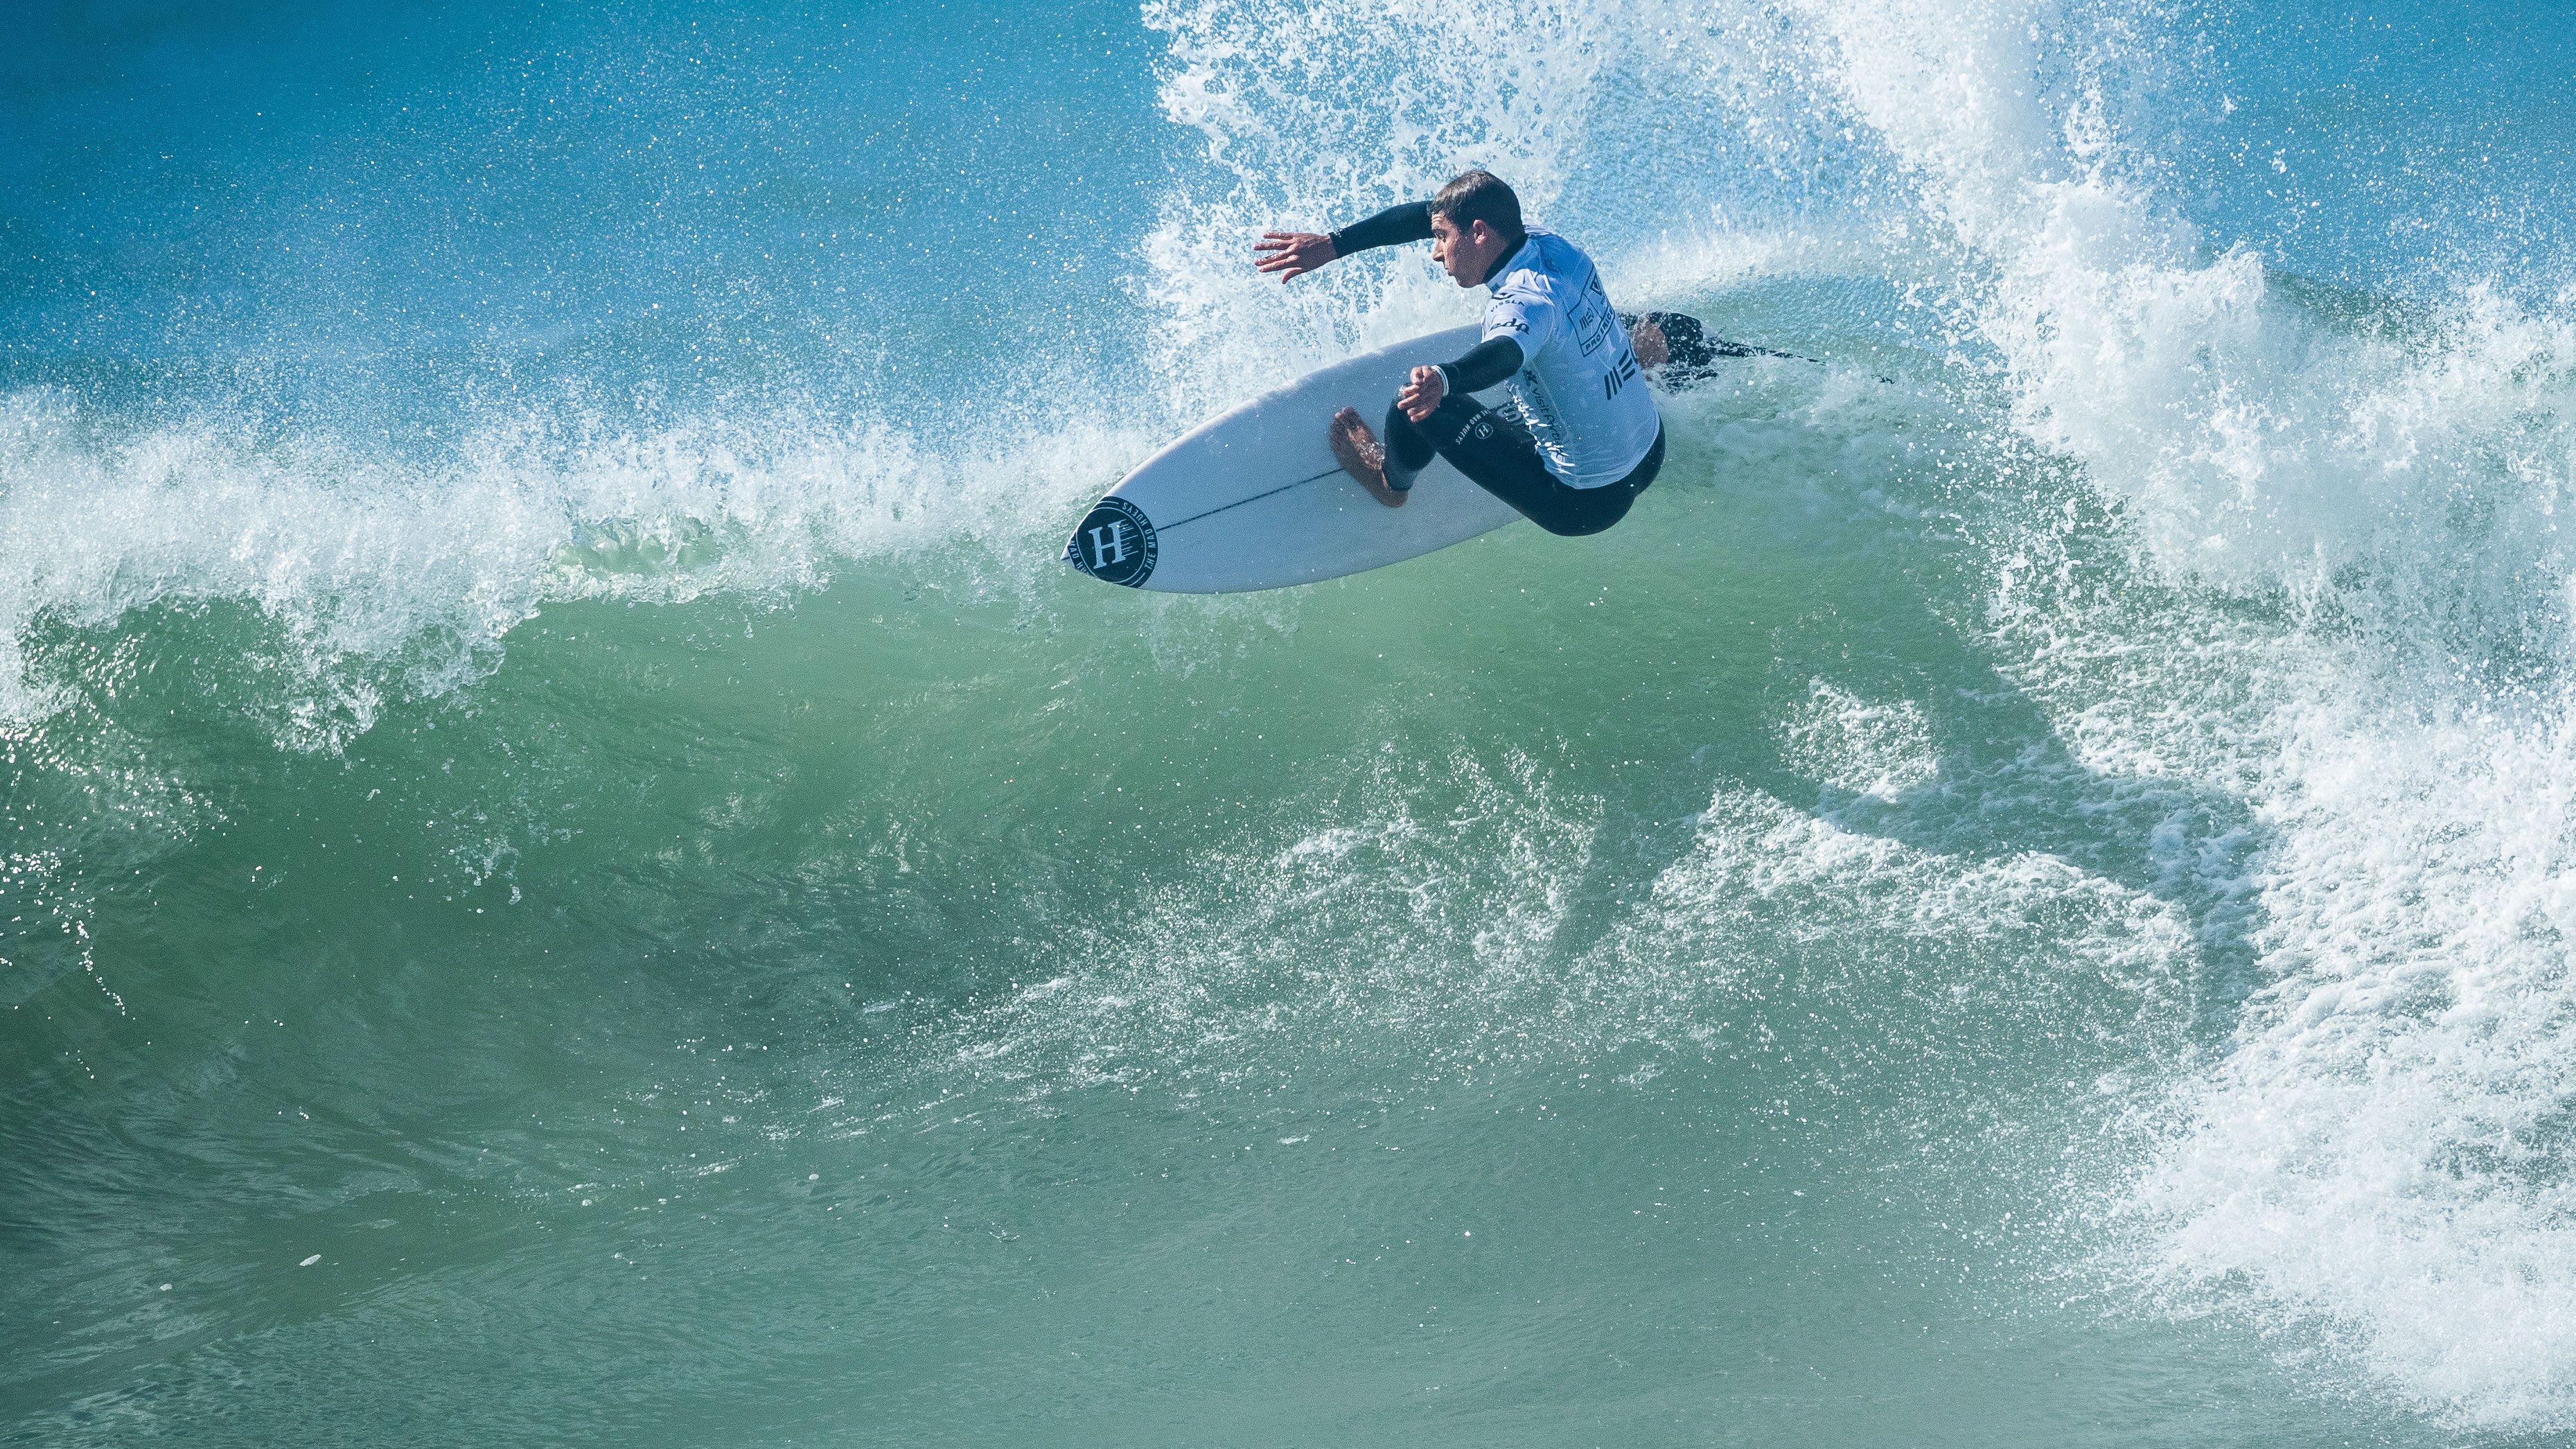 Callum Robson of Australia surfing in Round of 24 at the Meo Vissla Ericeira Pro on October 7, 2021 in Ericeira, Portugal. (Photo by Damien Poullenot/World Surf League)